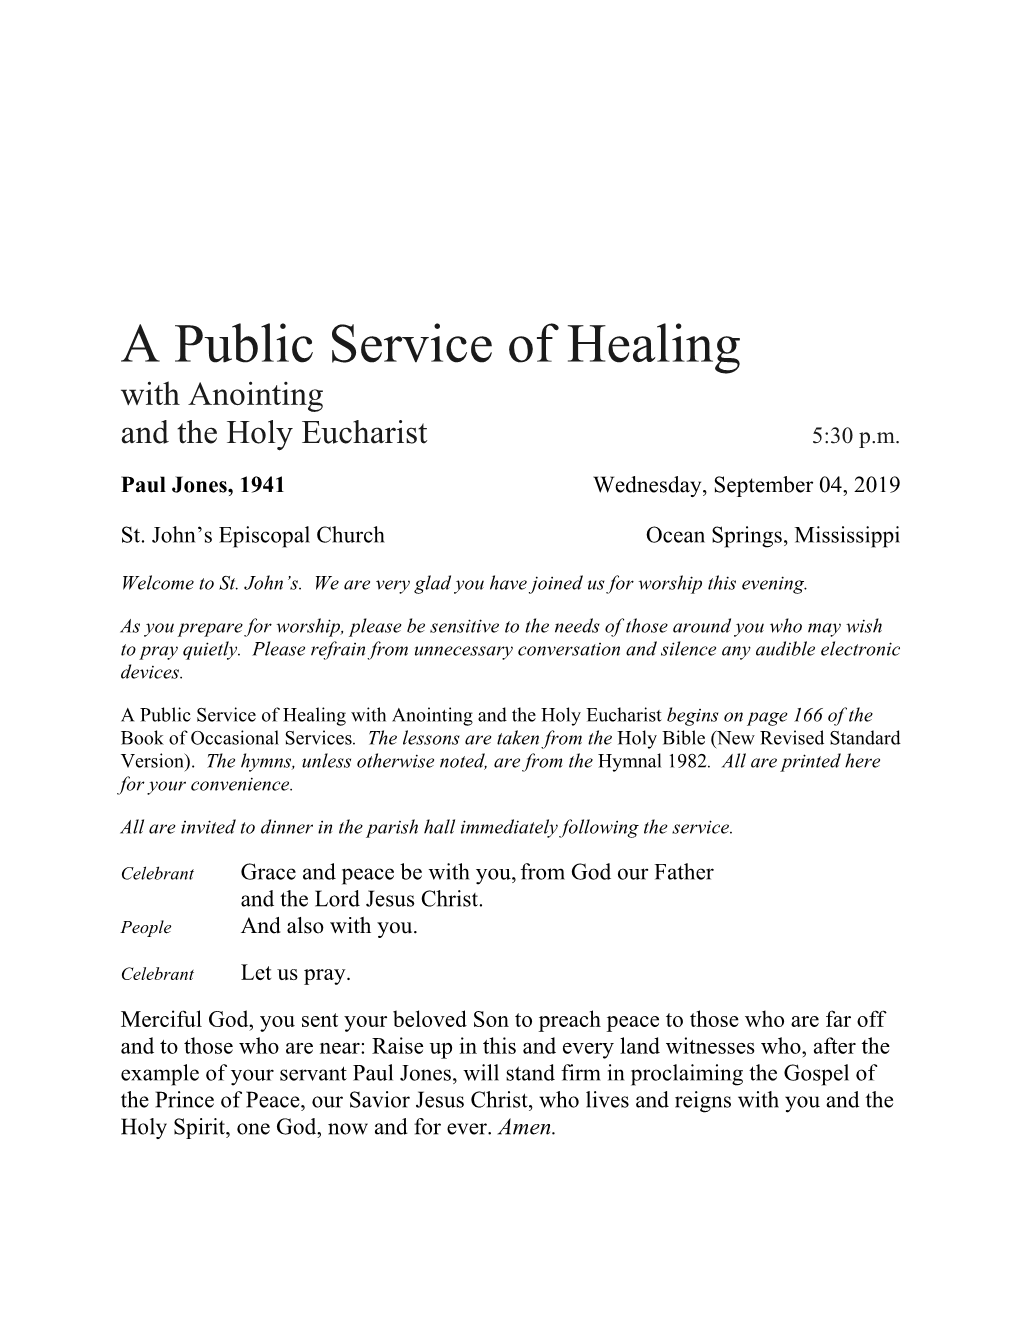 A Public Service of Healing with Anointing and the Holy Eucharist 5:30 P.M